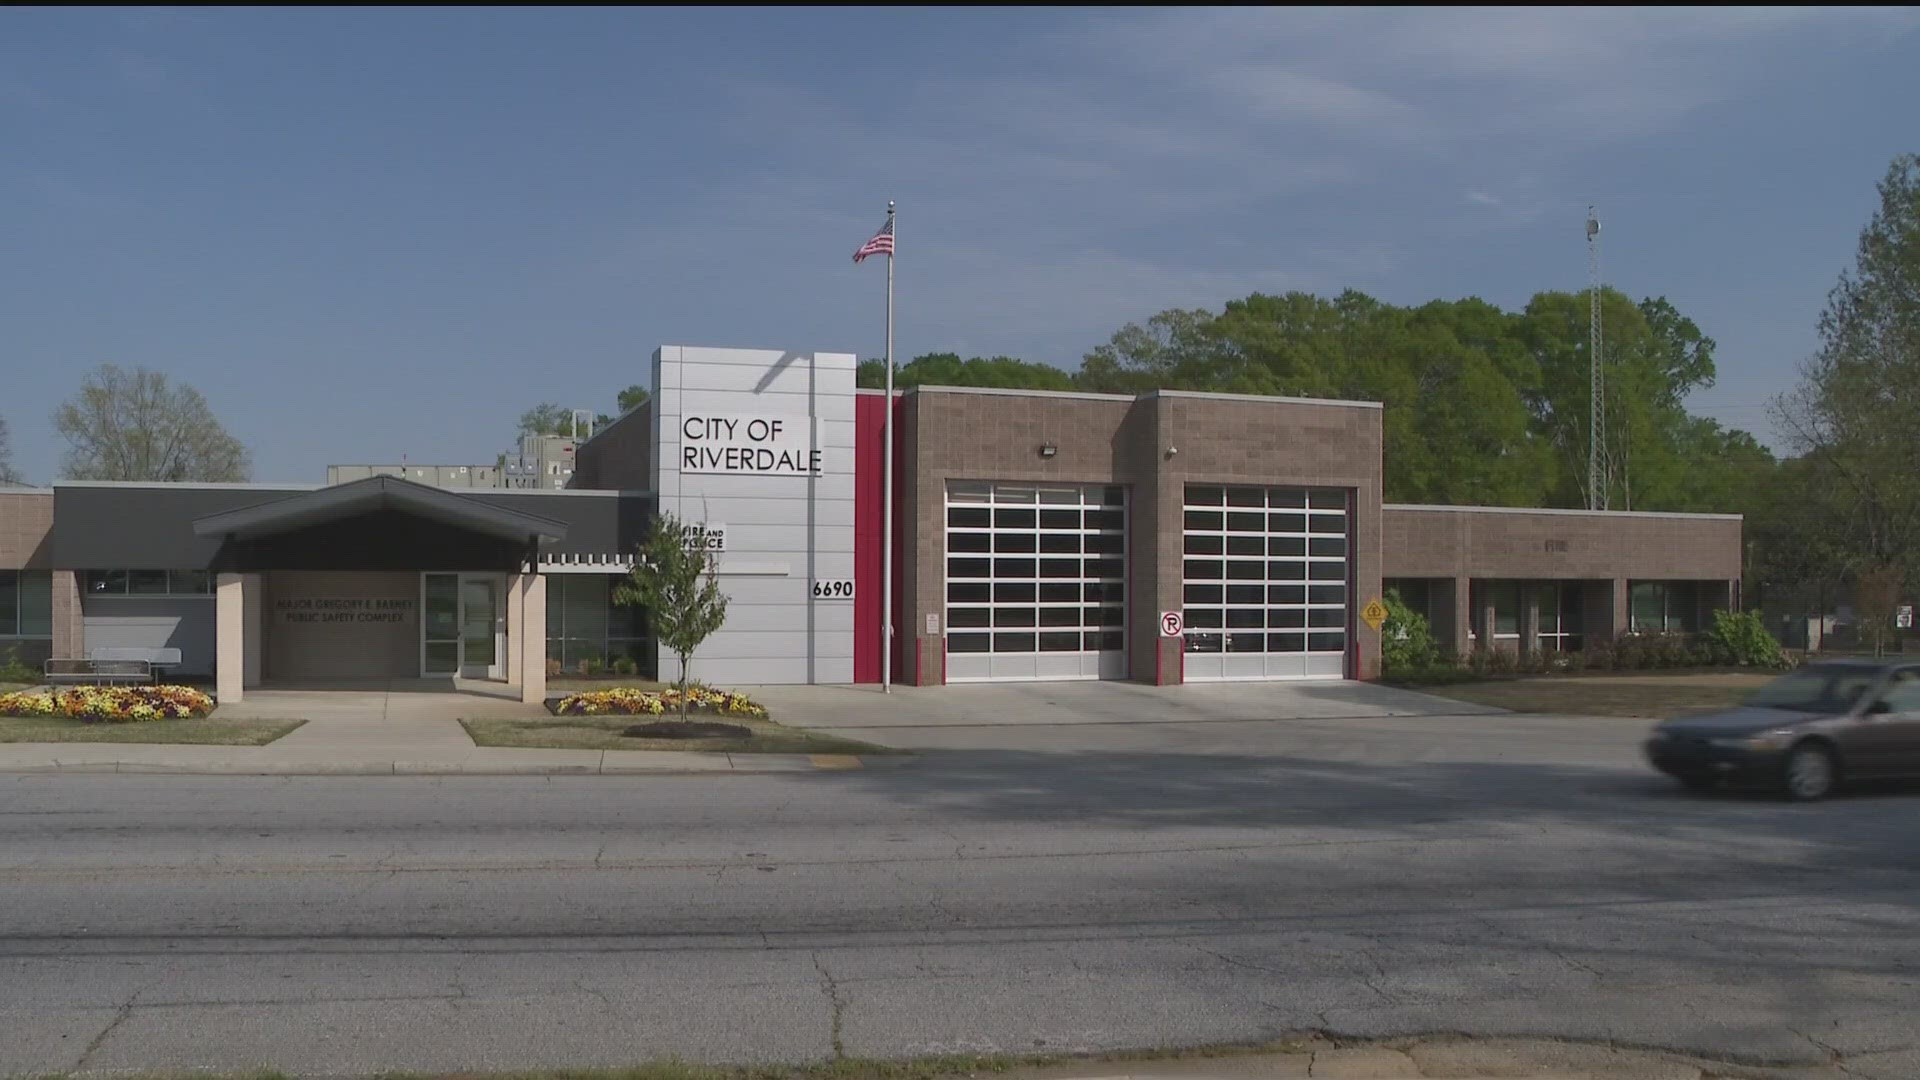 The fire department debate continues as Riverdale talks about consolidating its fire department with Clayton County.